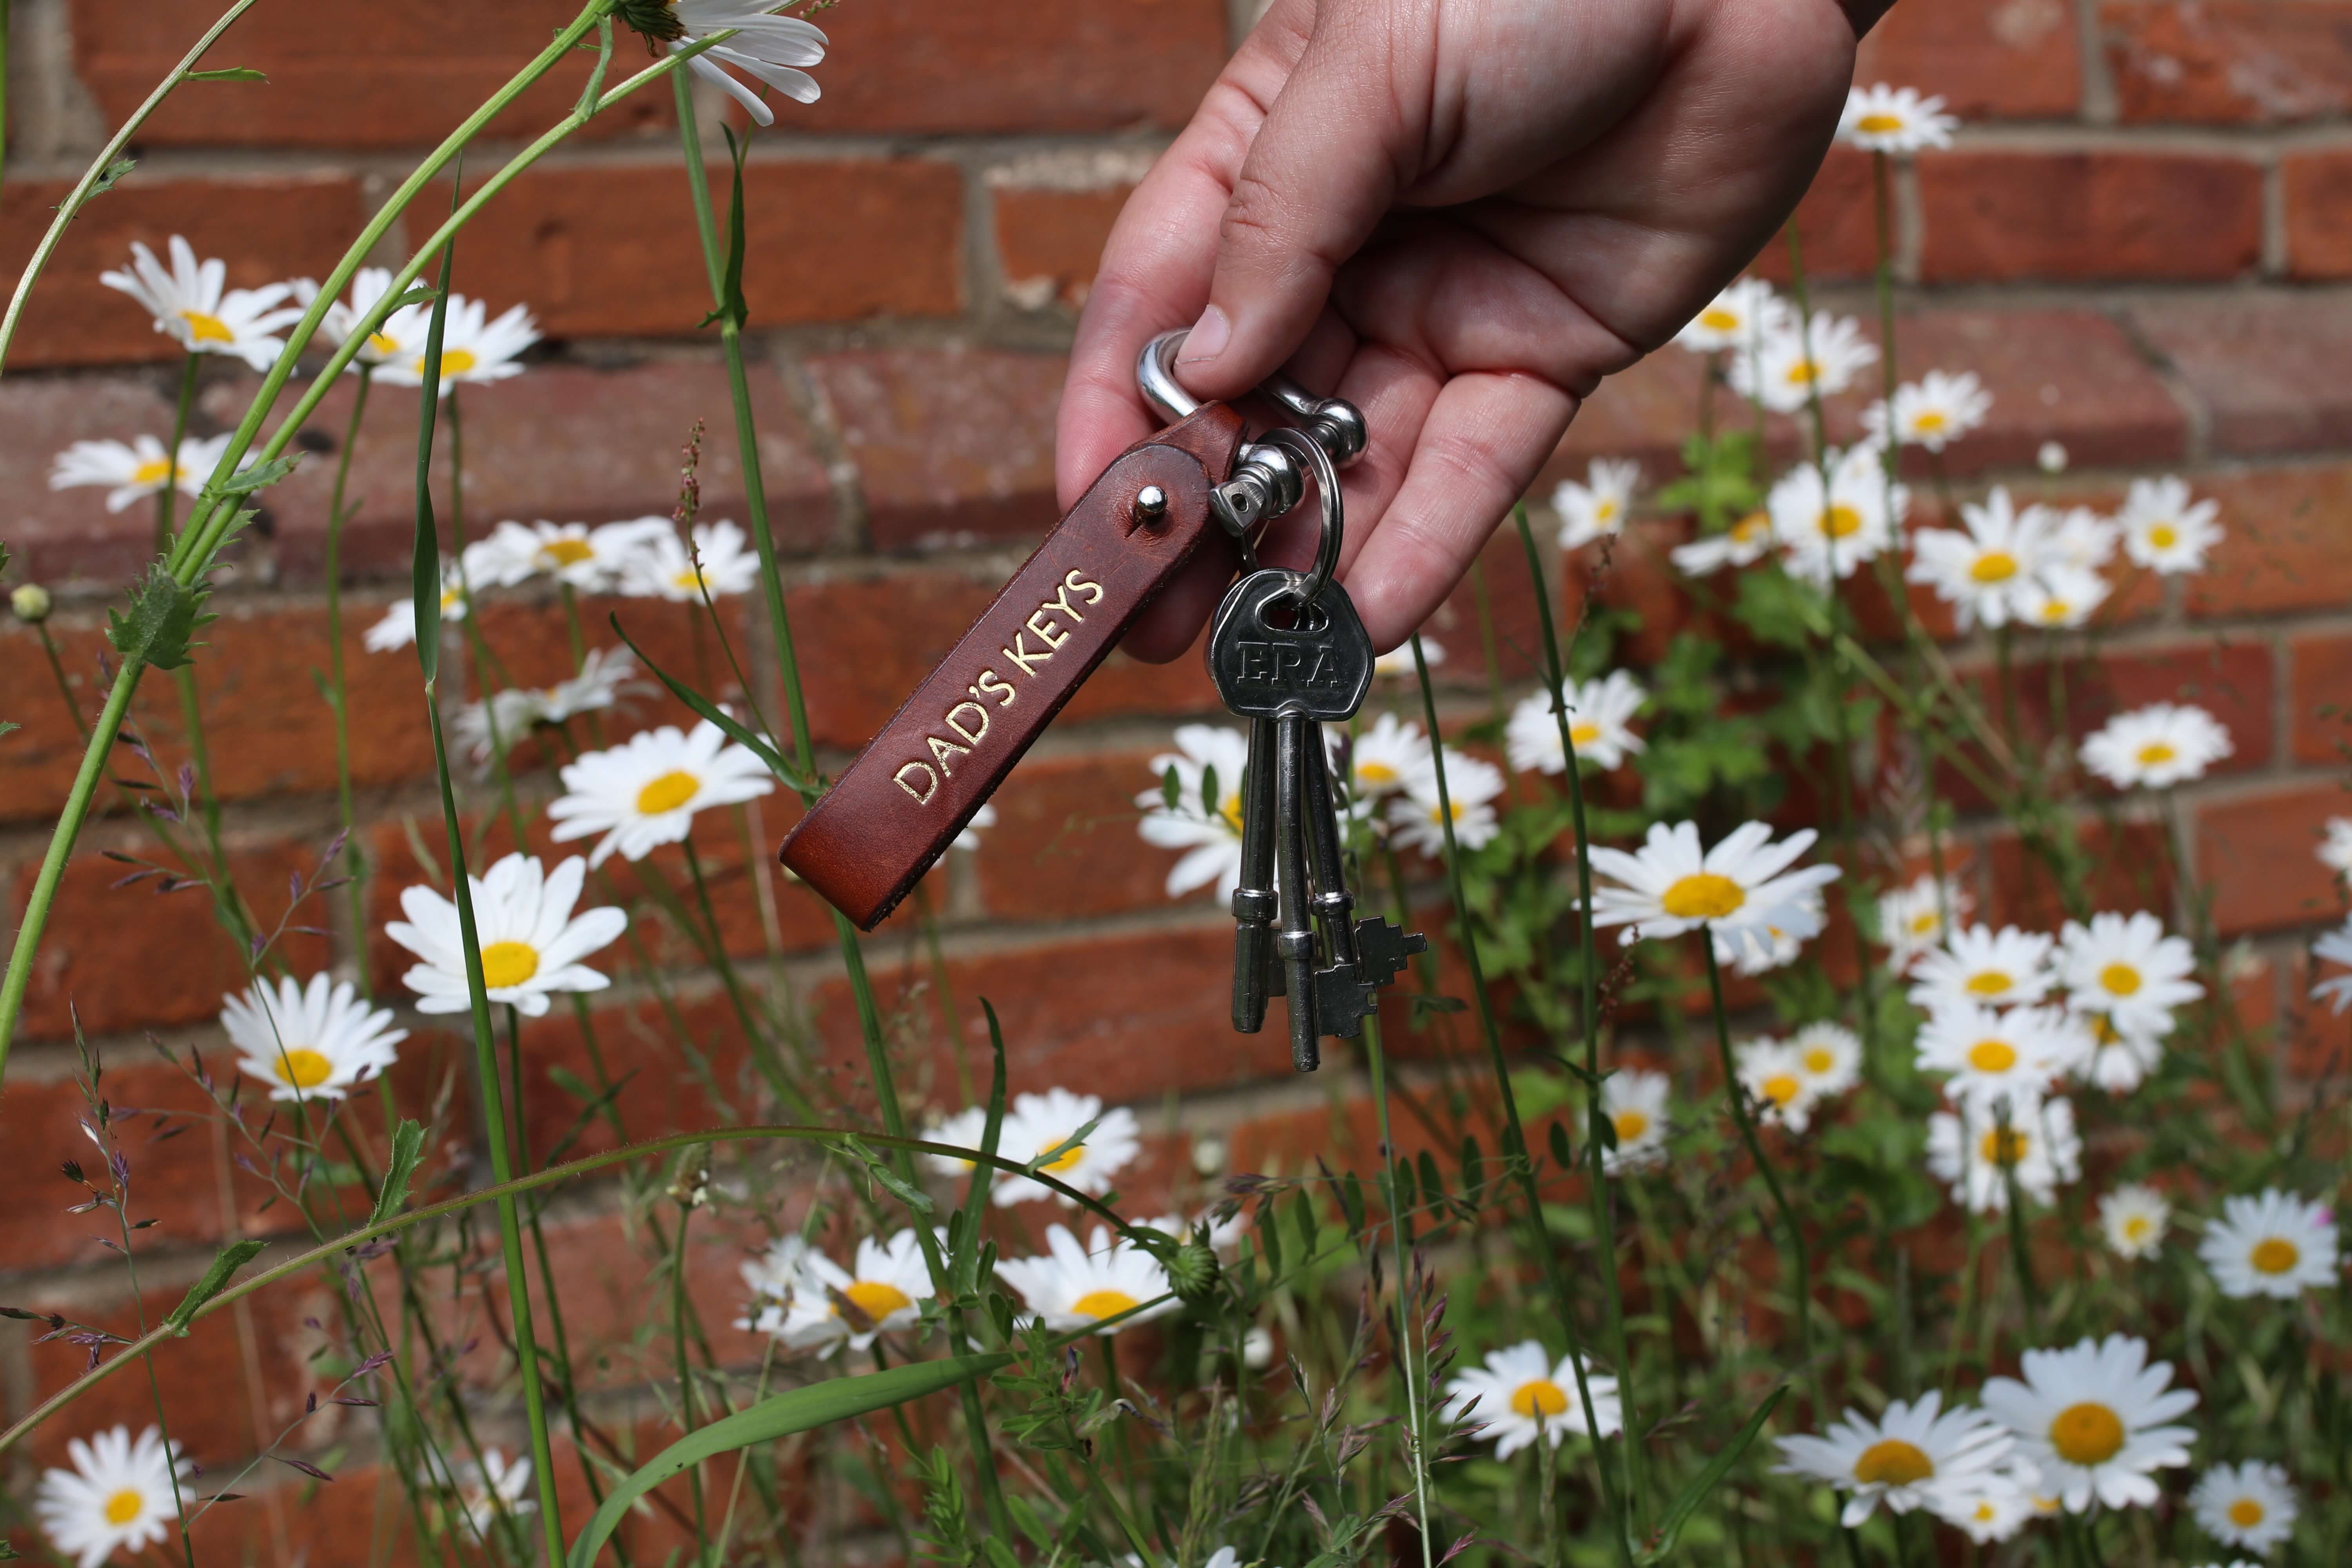 A leather keychain that reads "DAD'S KEYS" on a ring of keys